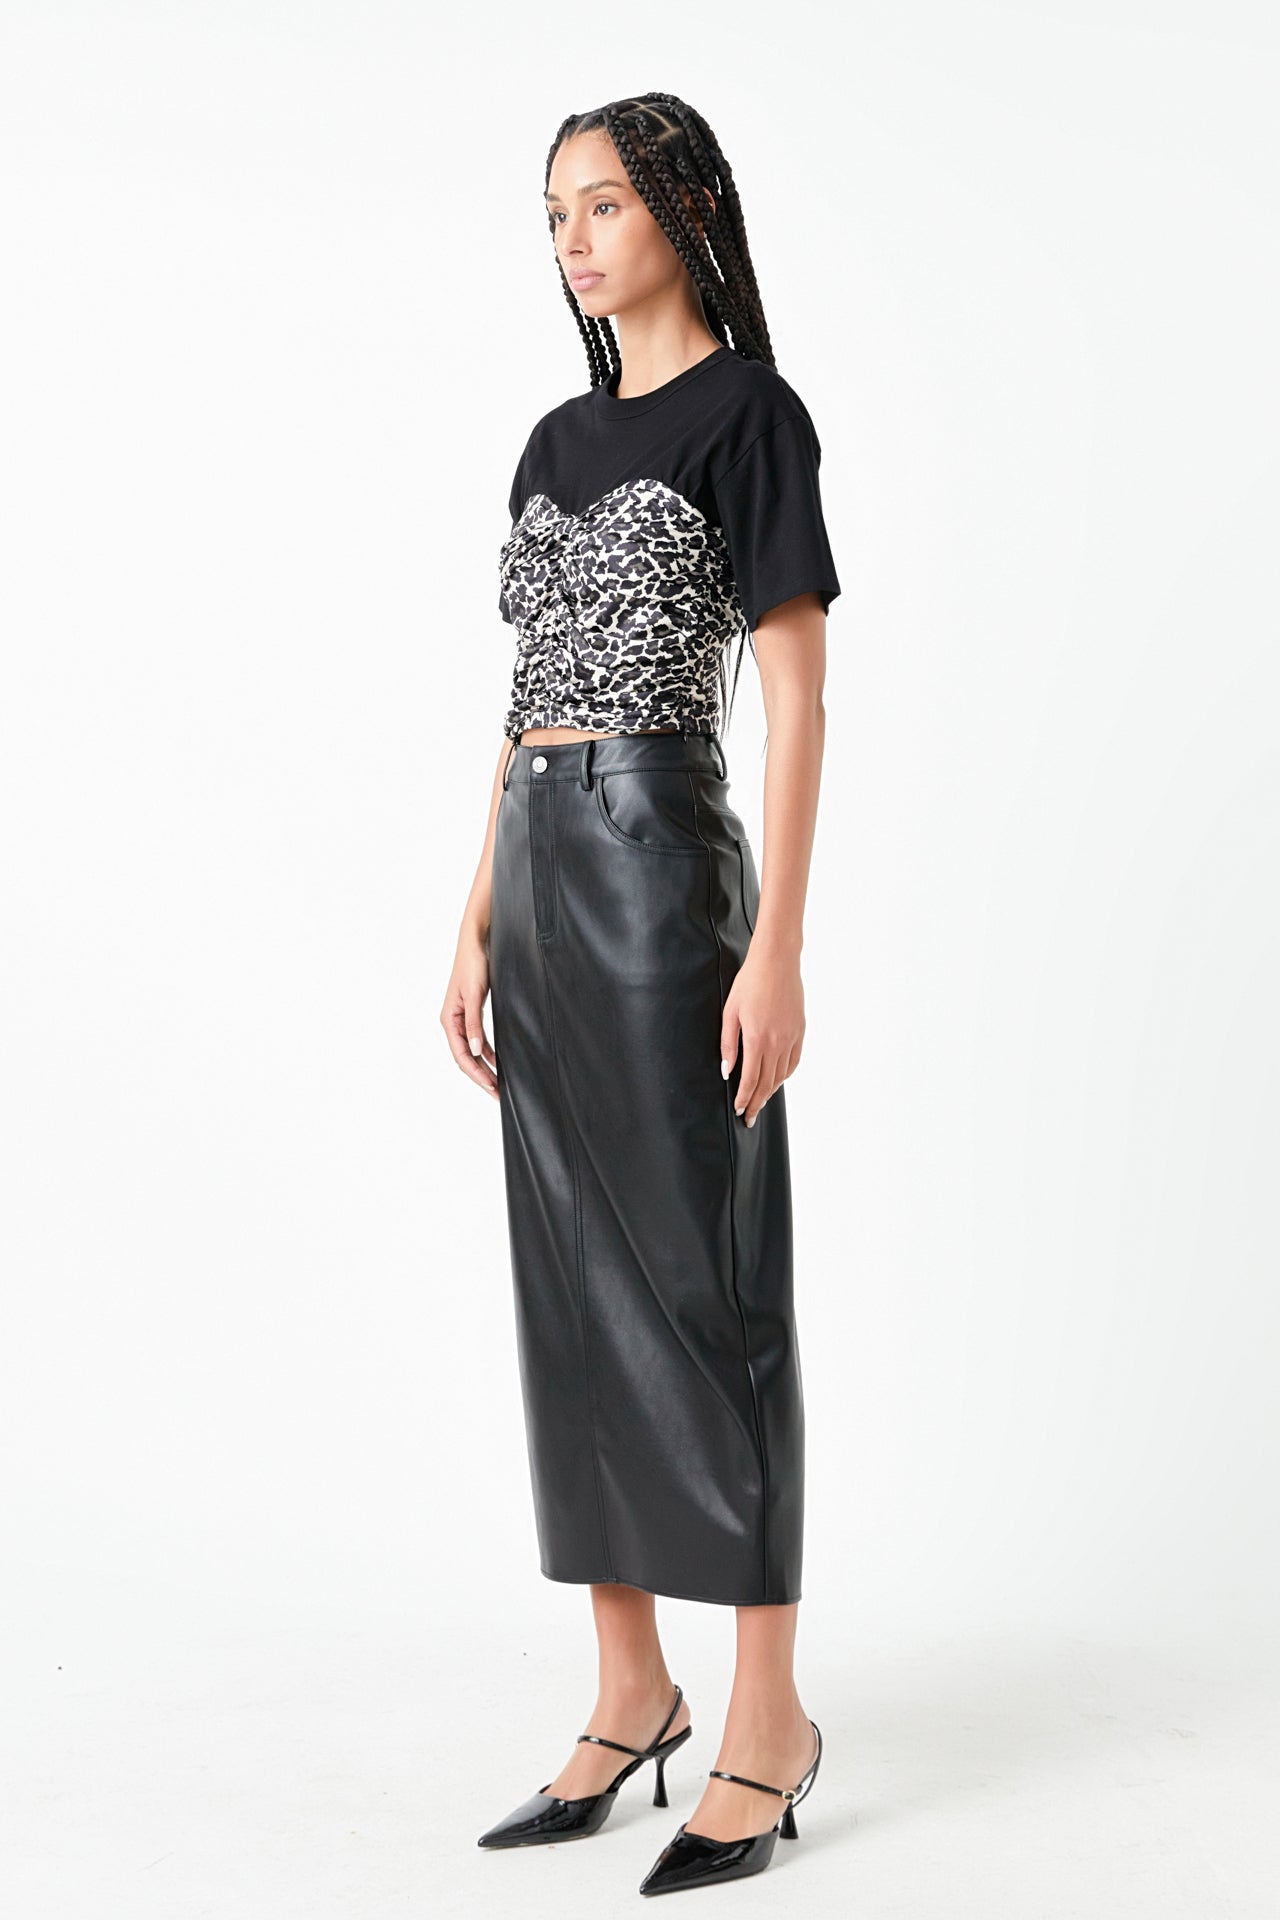 GREY LAB - Leopard Shirred Cropped Top - TOPS available at Objectrare